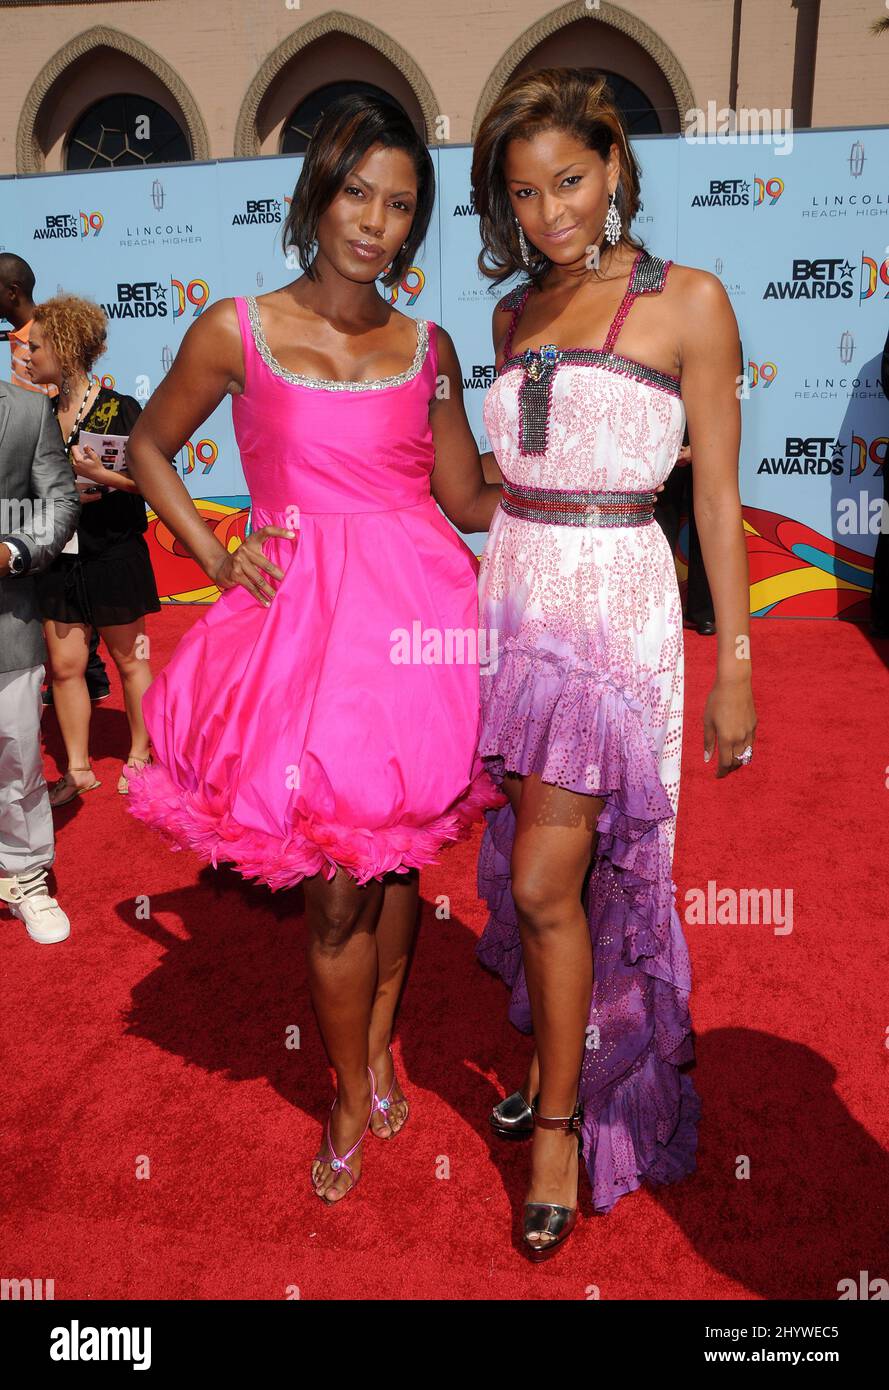 Omarosa Manigault-Stallworth and Claudia Jordan at the 2009 BET Awards held at The Shrine Auditorium in Los Angeles, California. Stock Photo